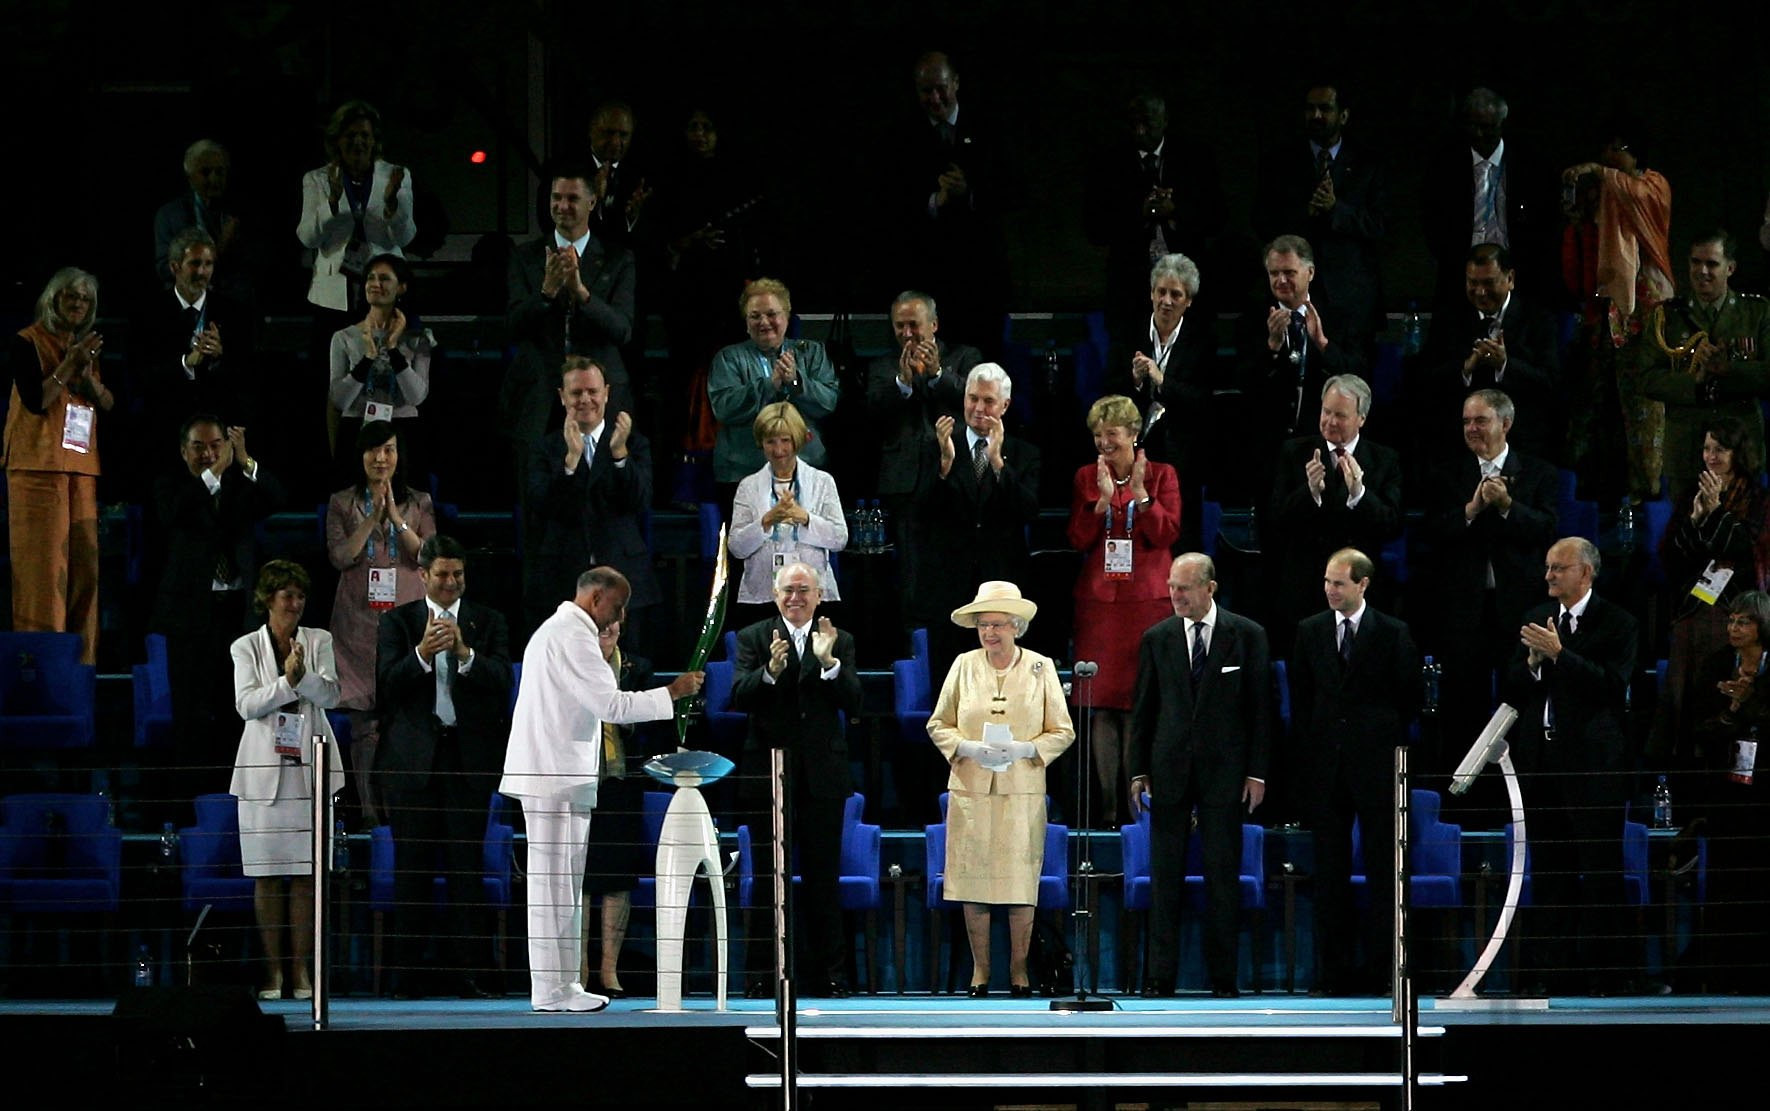 In 2006, Sir John Landy, third from left, pointed the Baton at an autocue screen to activate an electronic version of the Queen's address ©Getty Images